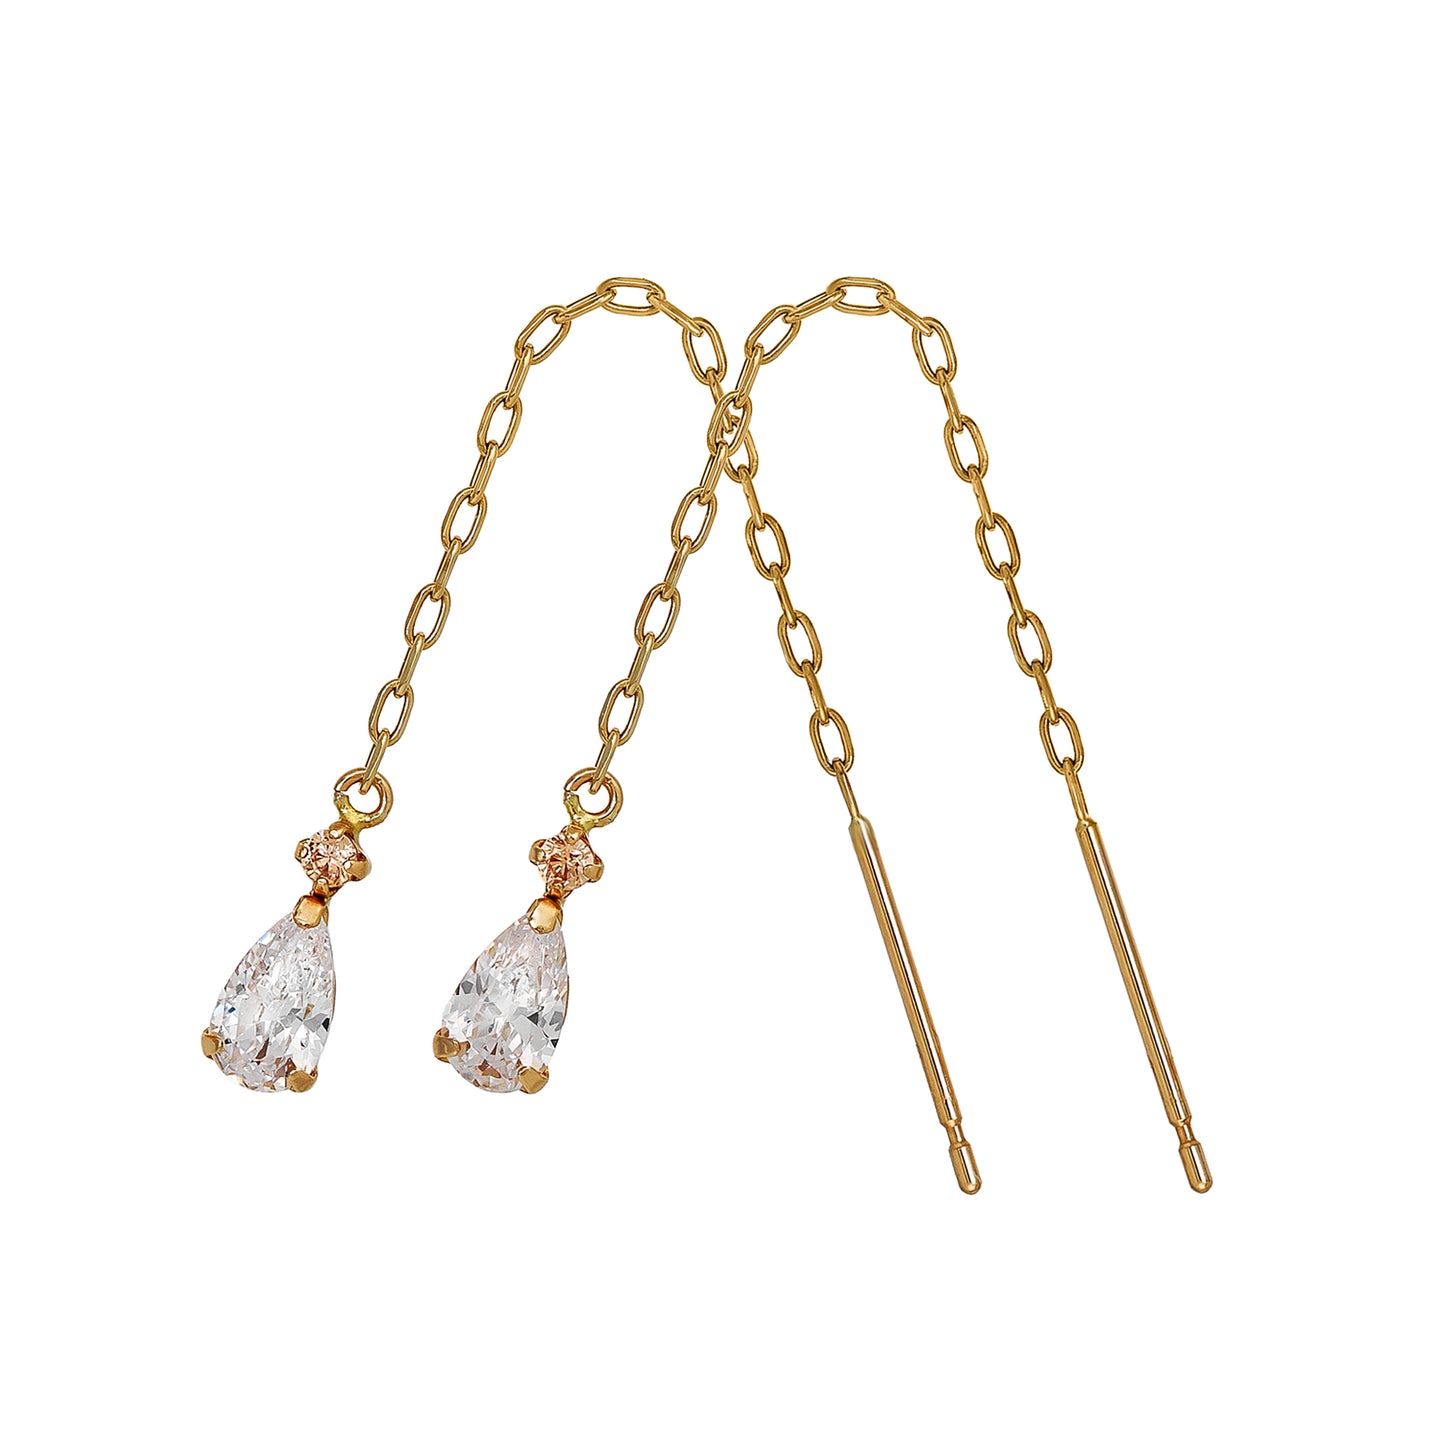 10K Drop Threader Earrings (Yellow Gold) - Product Image